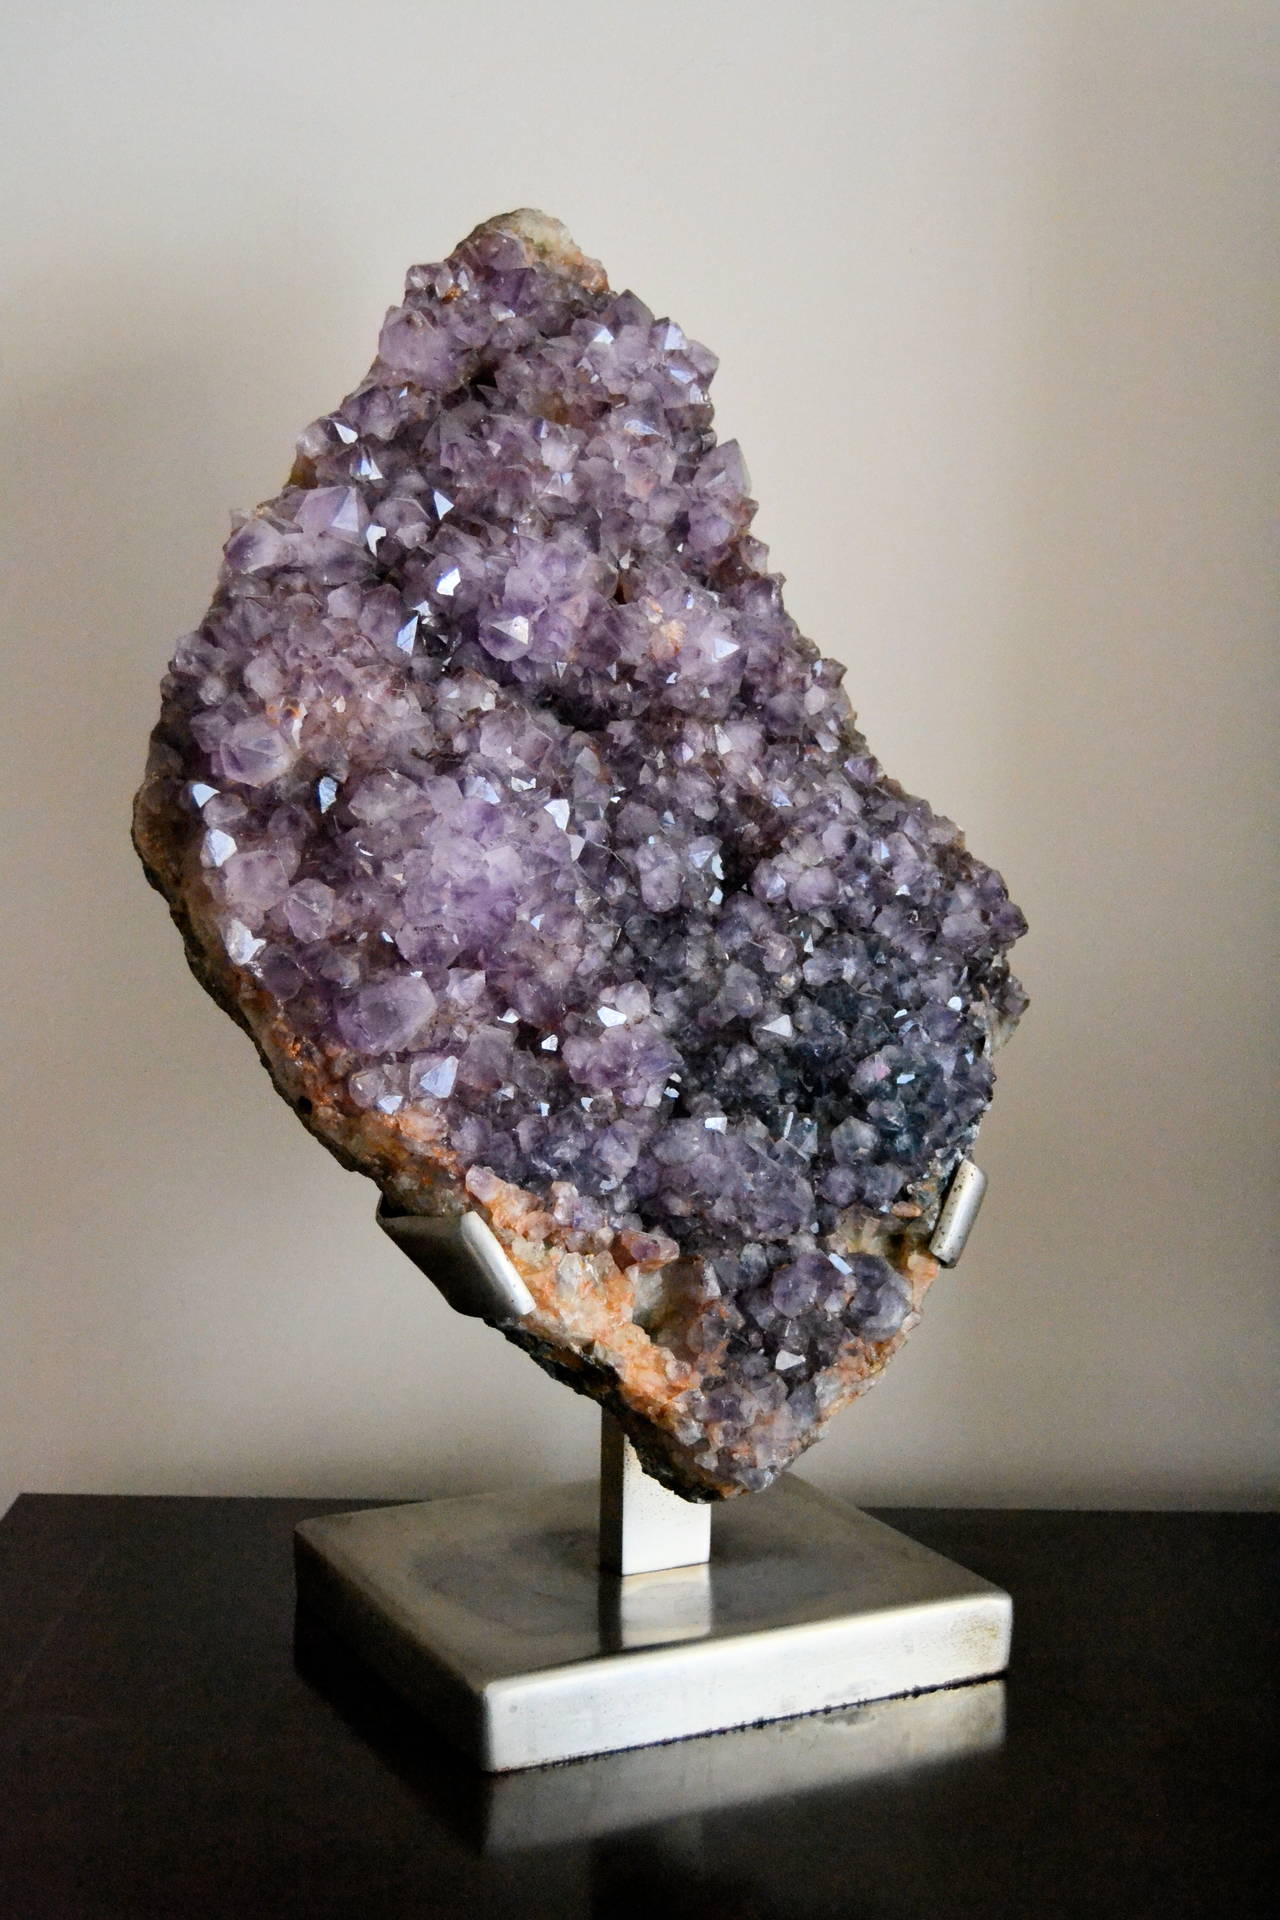 1970s Large amethyst mineral with stainless steel original  base.
The amethyst has the original base from the 1970s